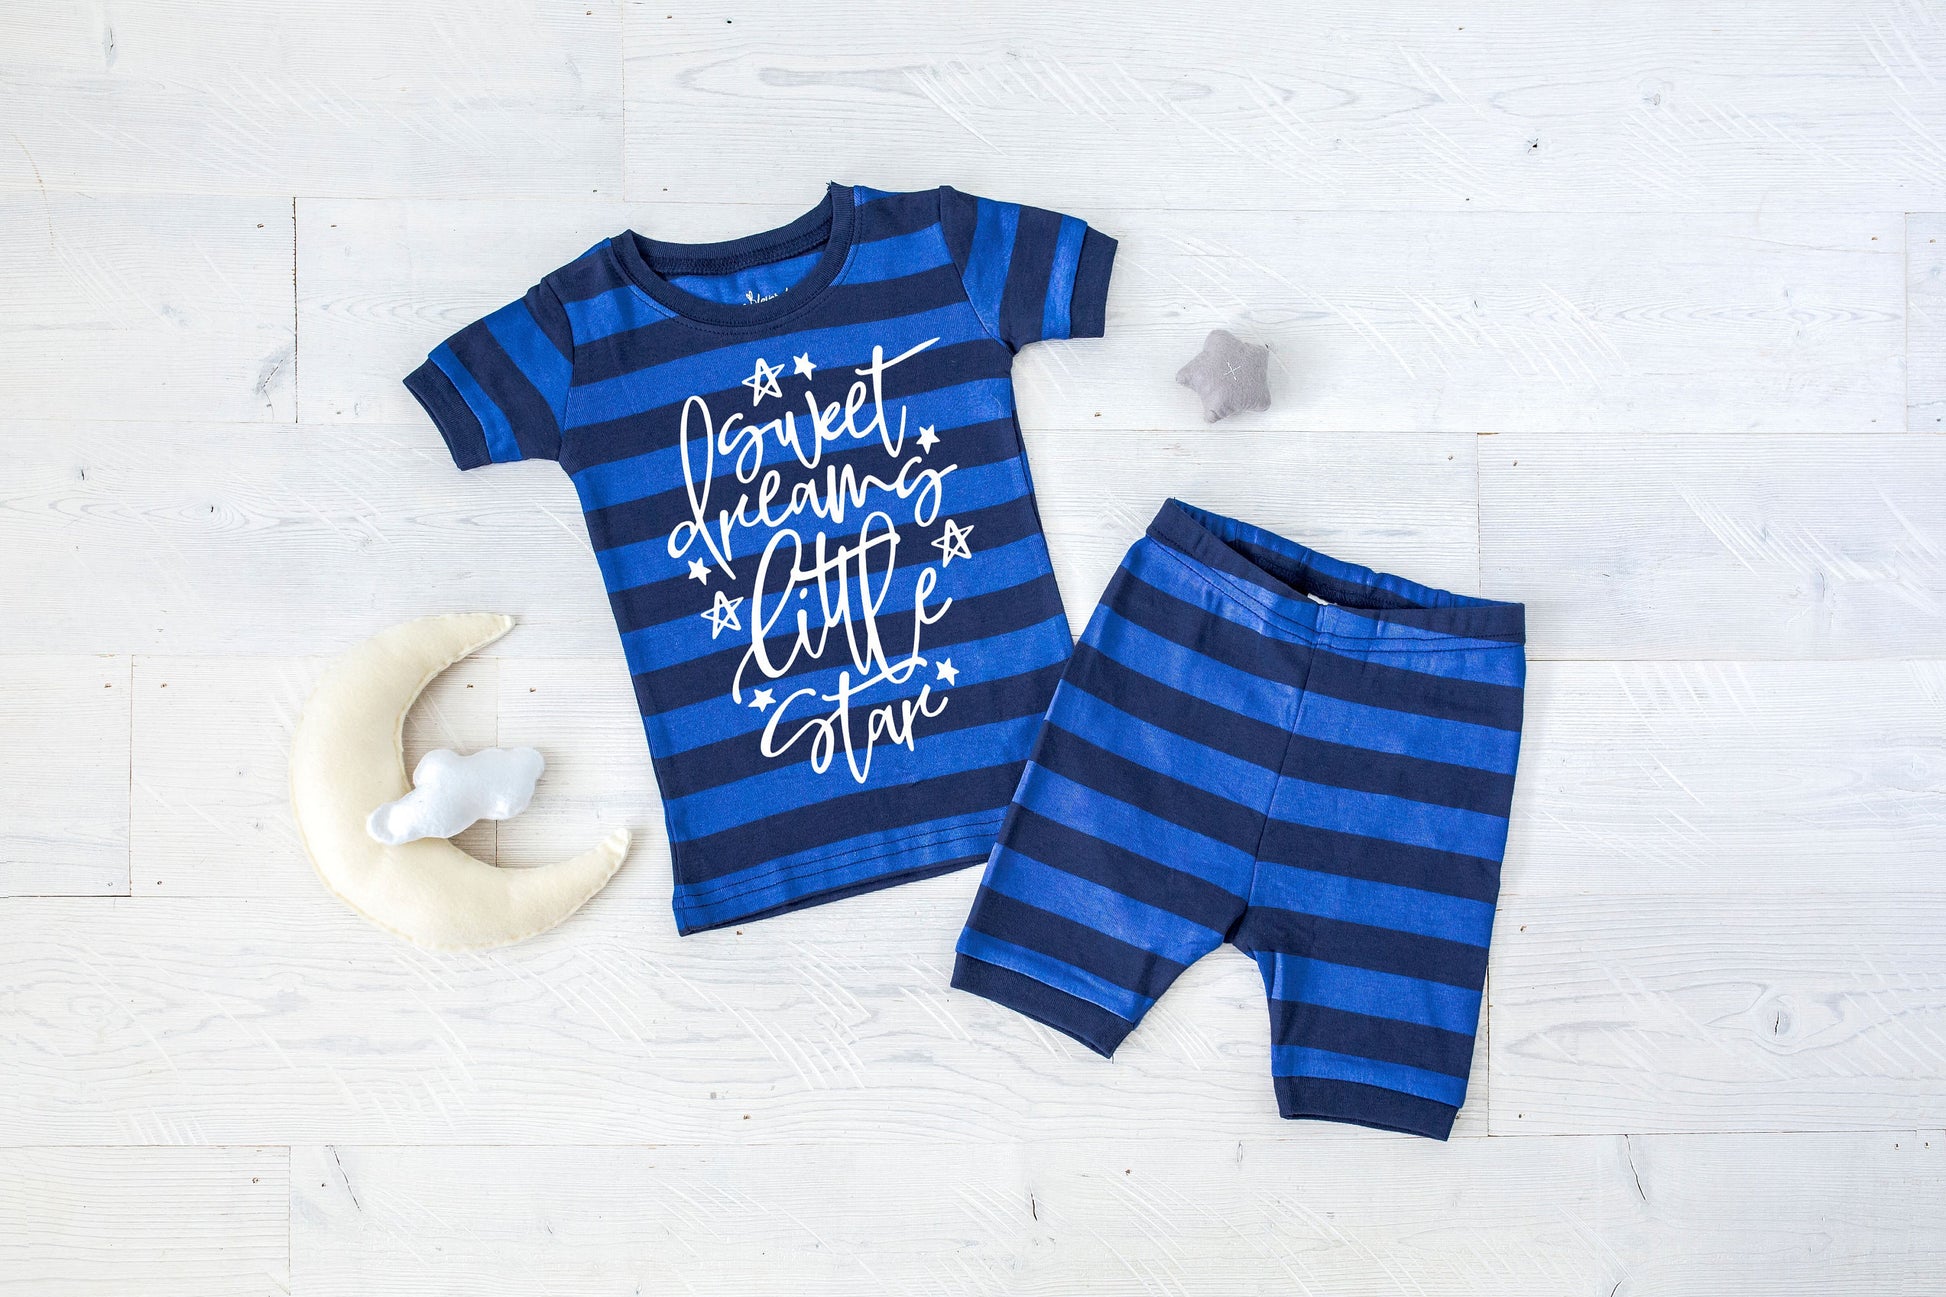 Sweet Dreams Little Star Blue Striped Shorts Toddler and Youth Pajamas - Boys Pajamas - Sleepover Pajamas - Toddler Boy Summer Pajamas